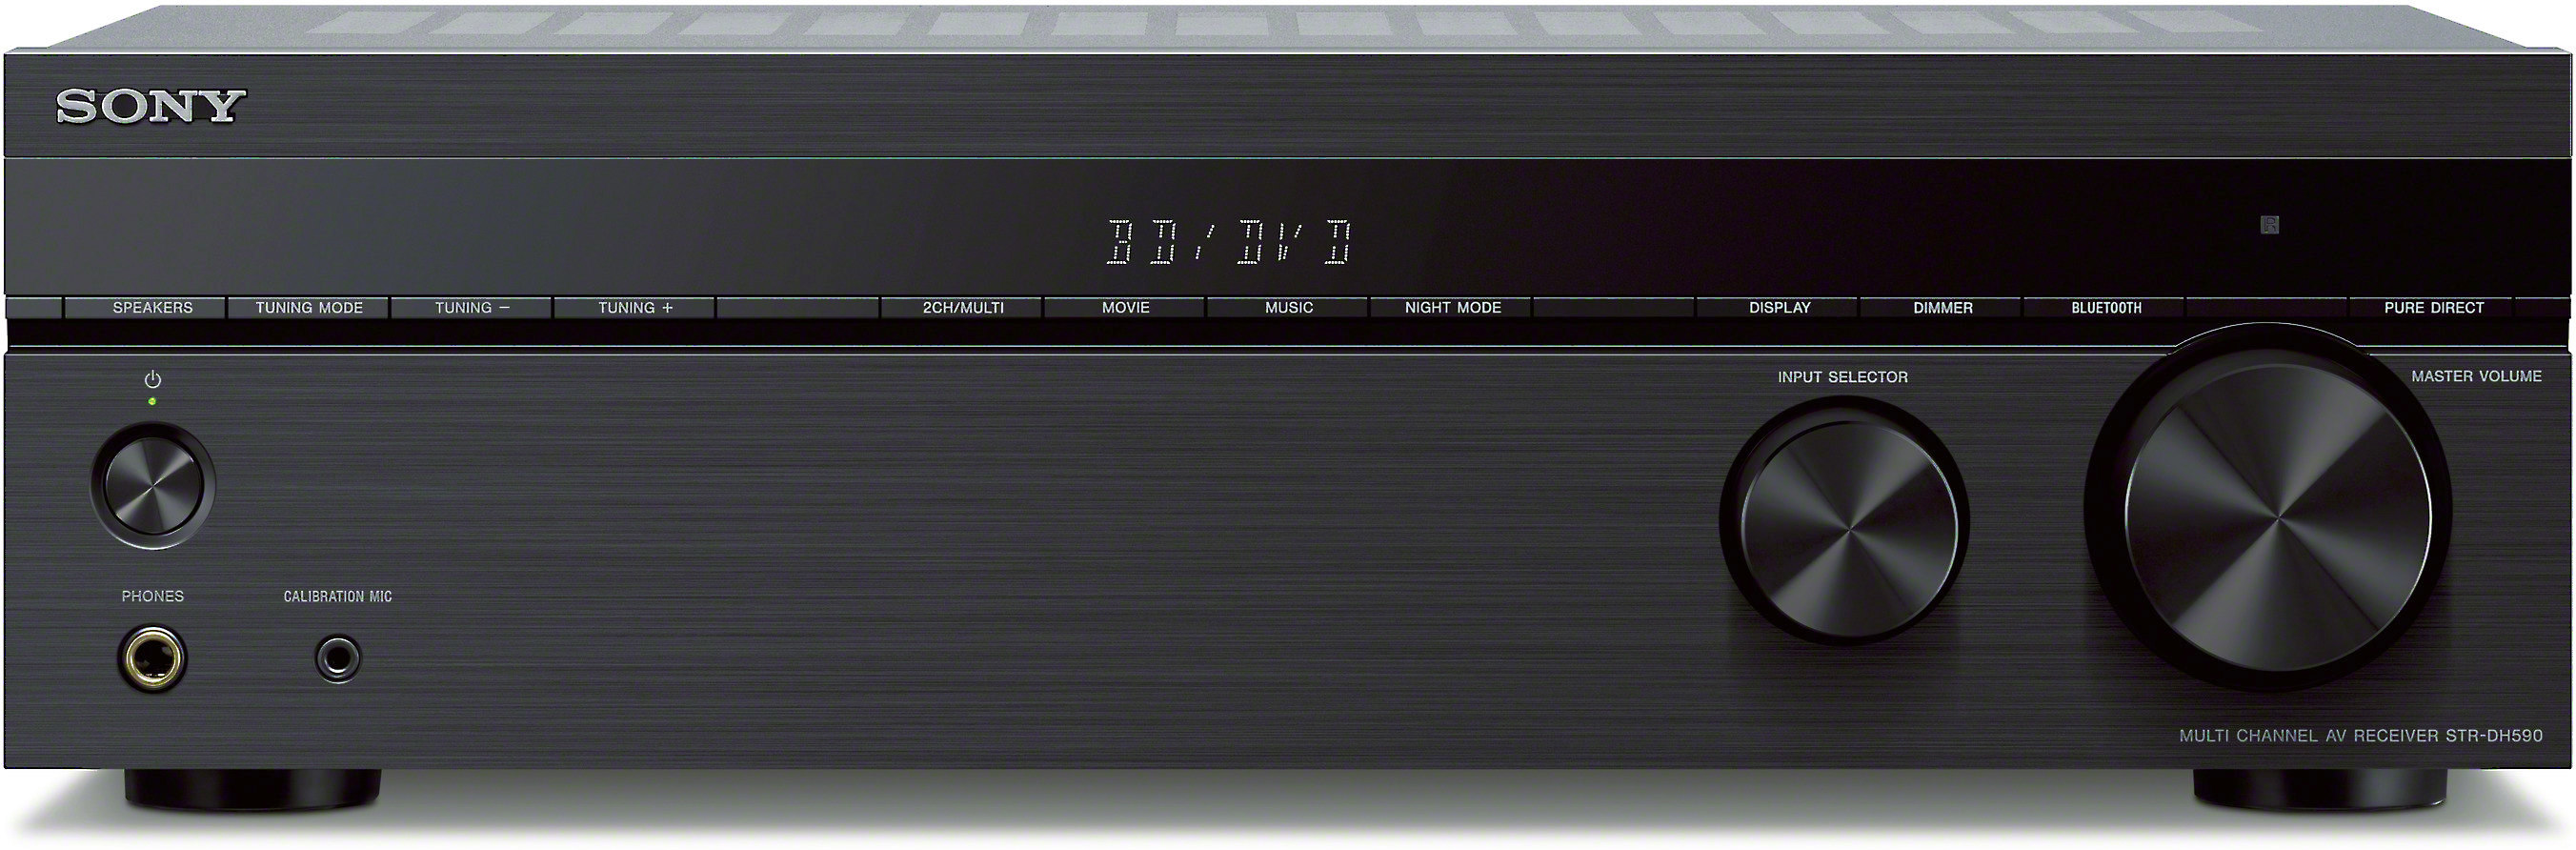 Home Theater Receivers, A/V Receivers 